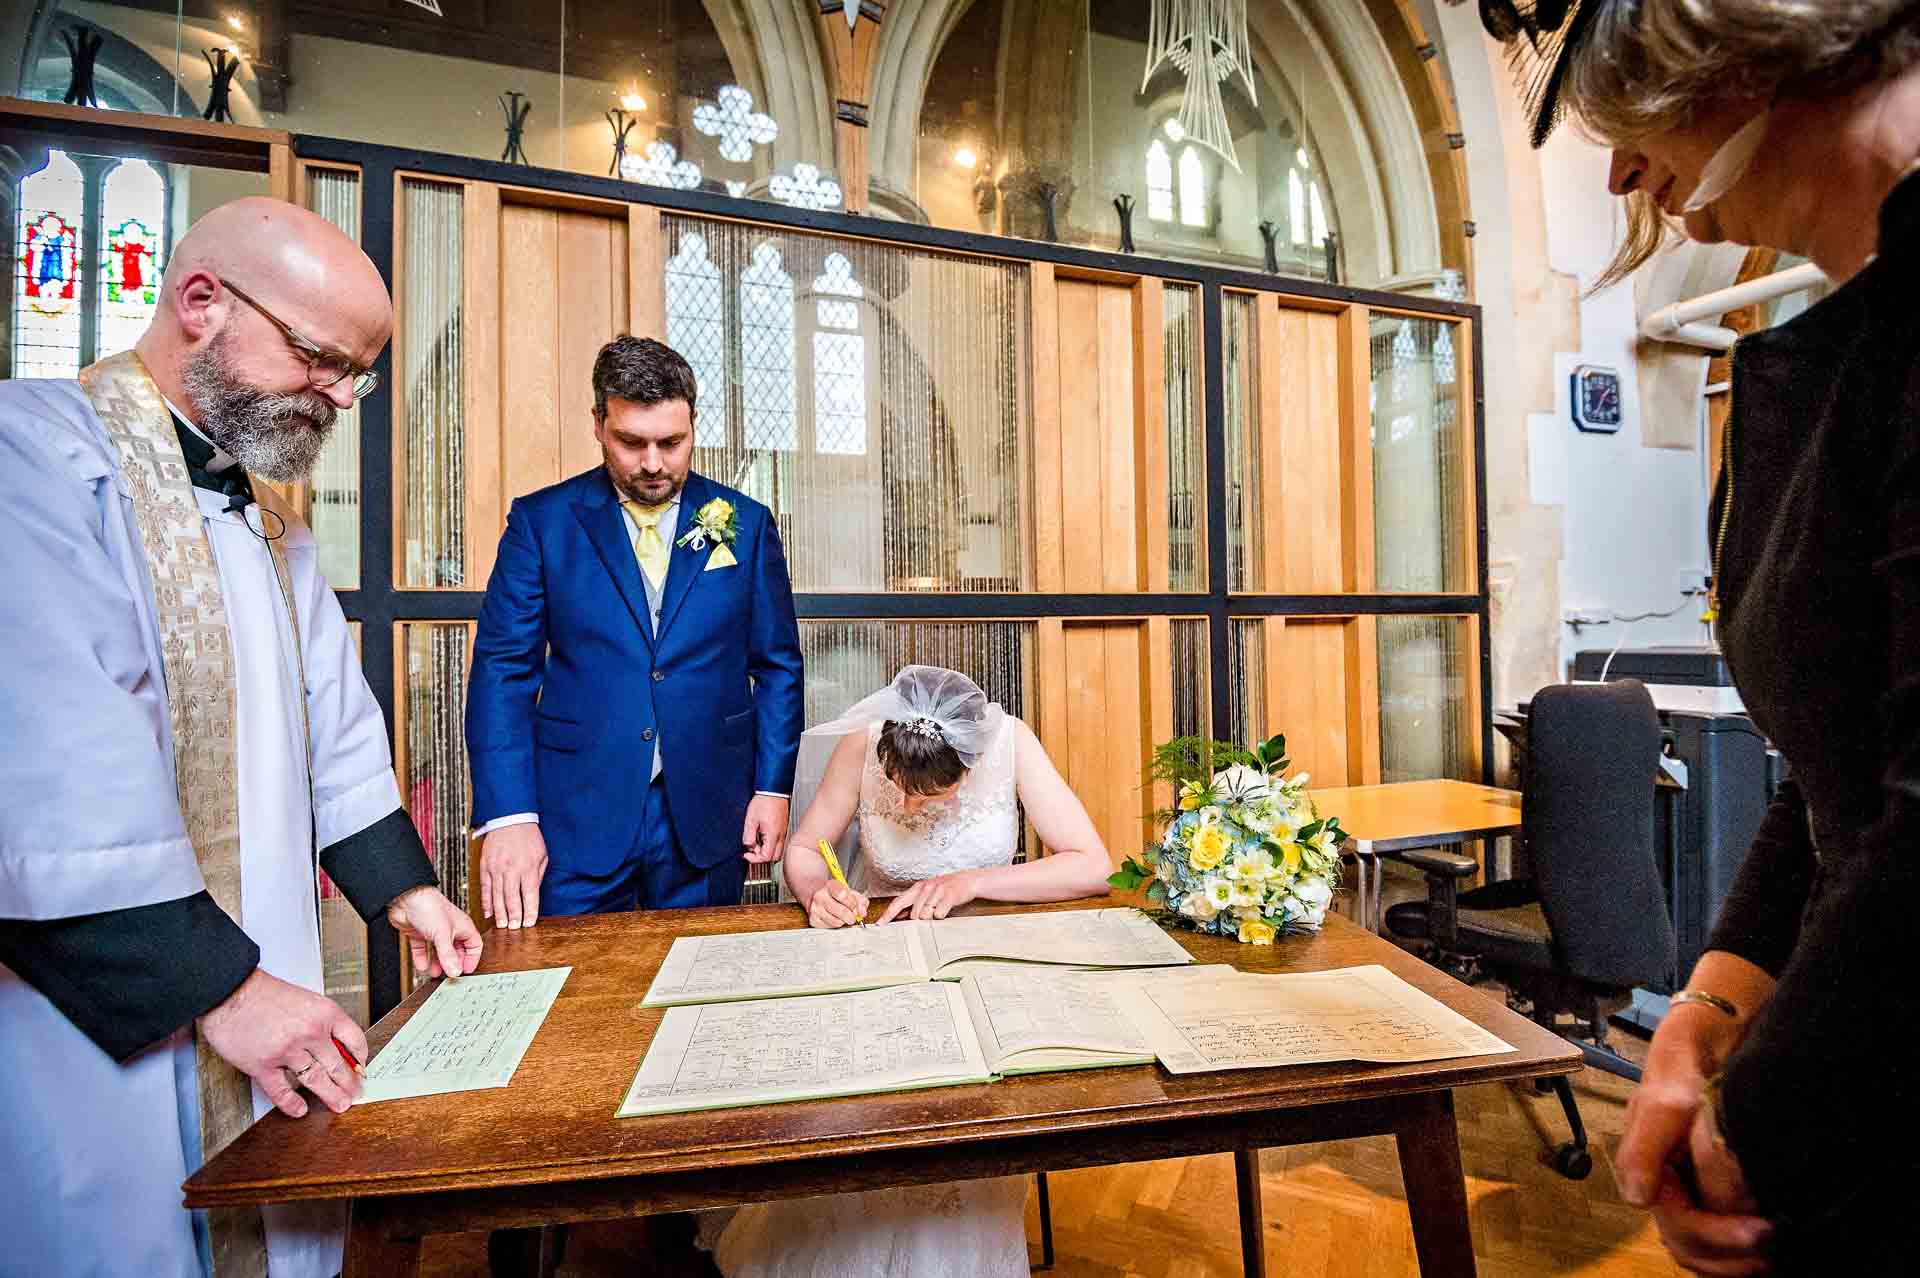 Signing of the Register at Church in South Wales with vicar looking on